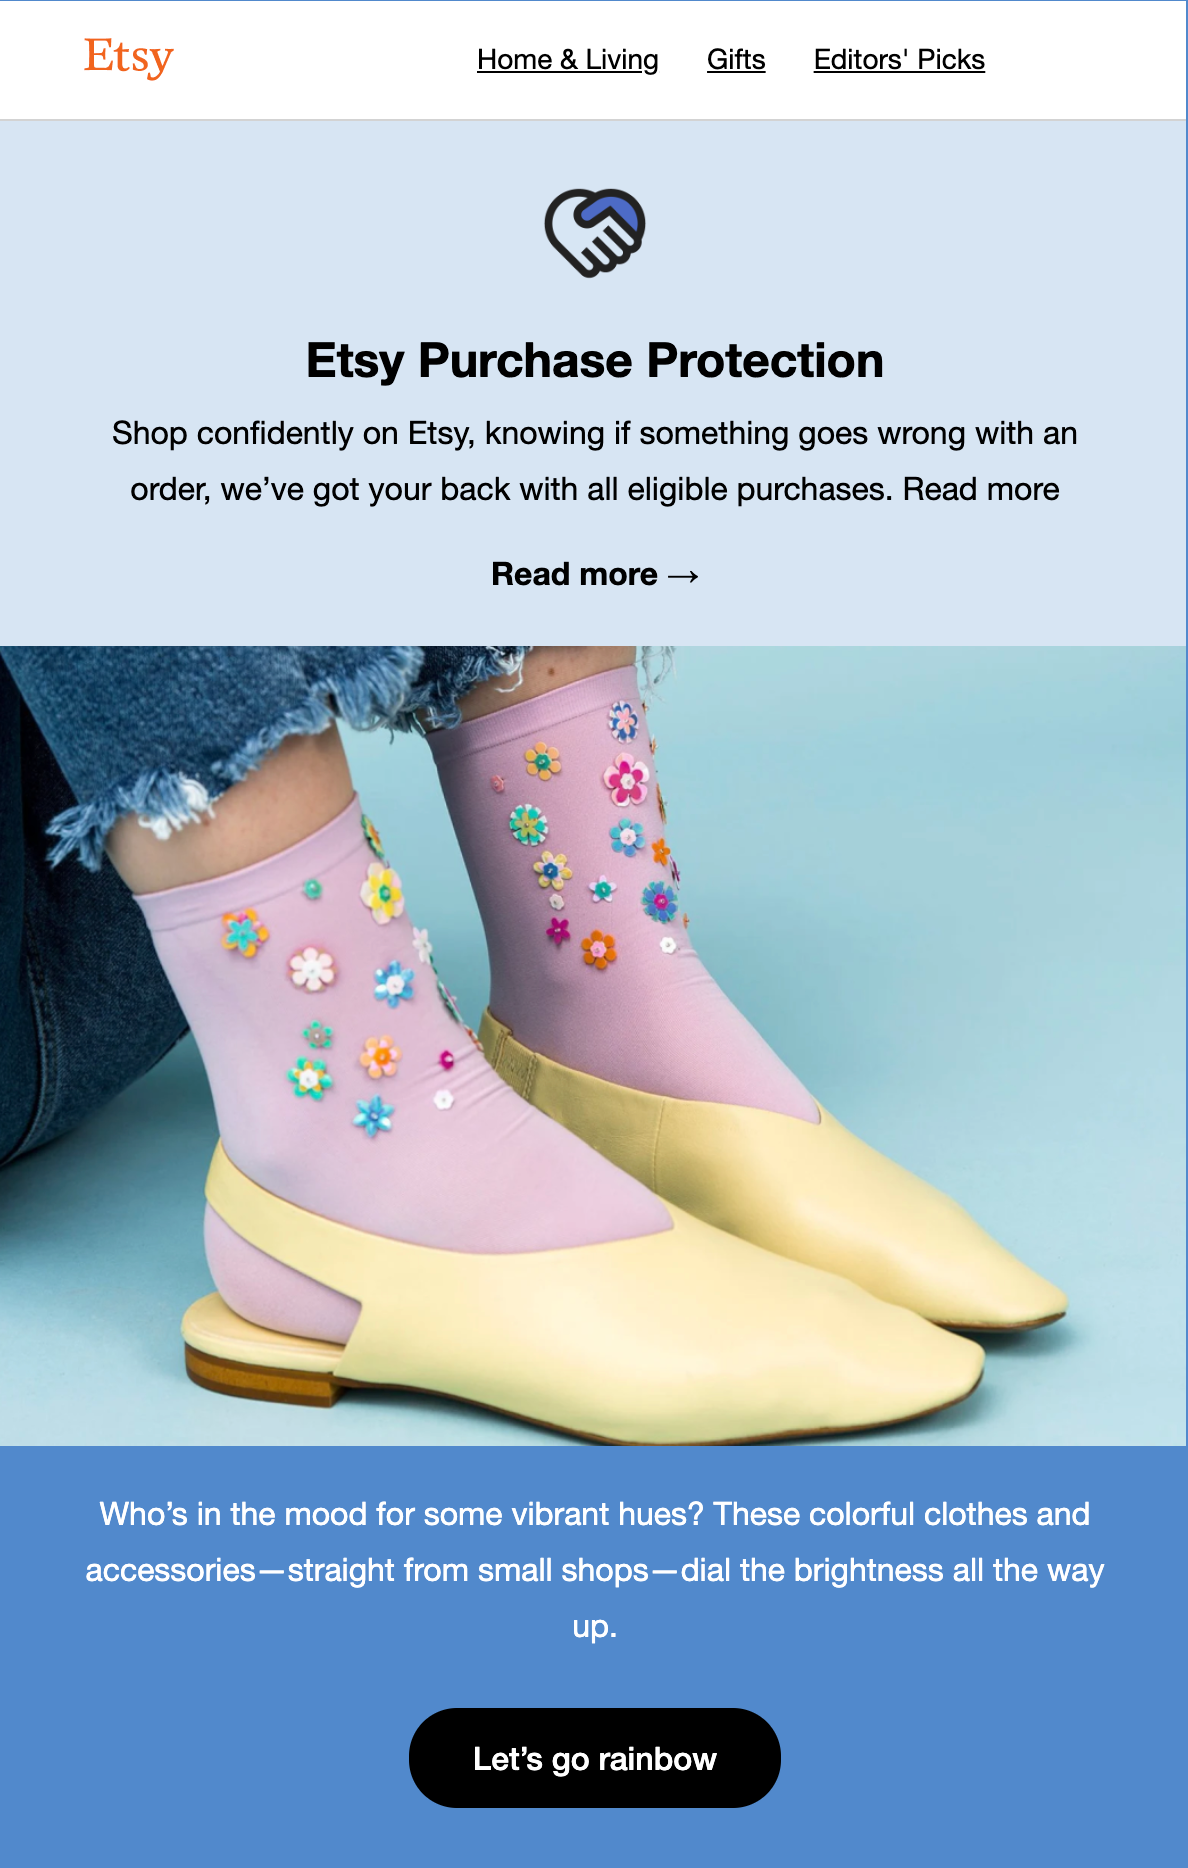 Email campaign by ETSY